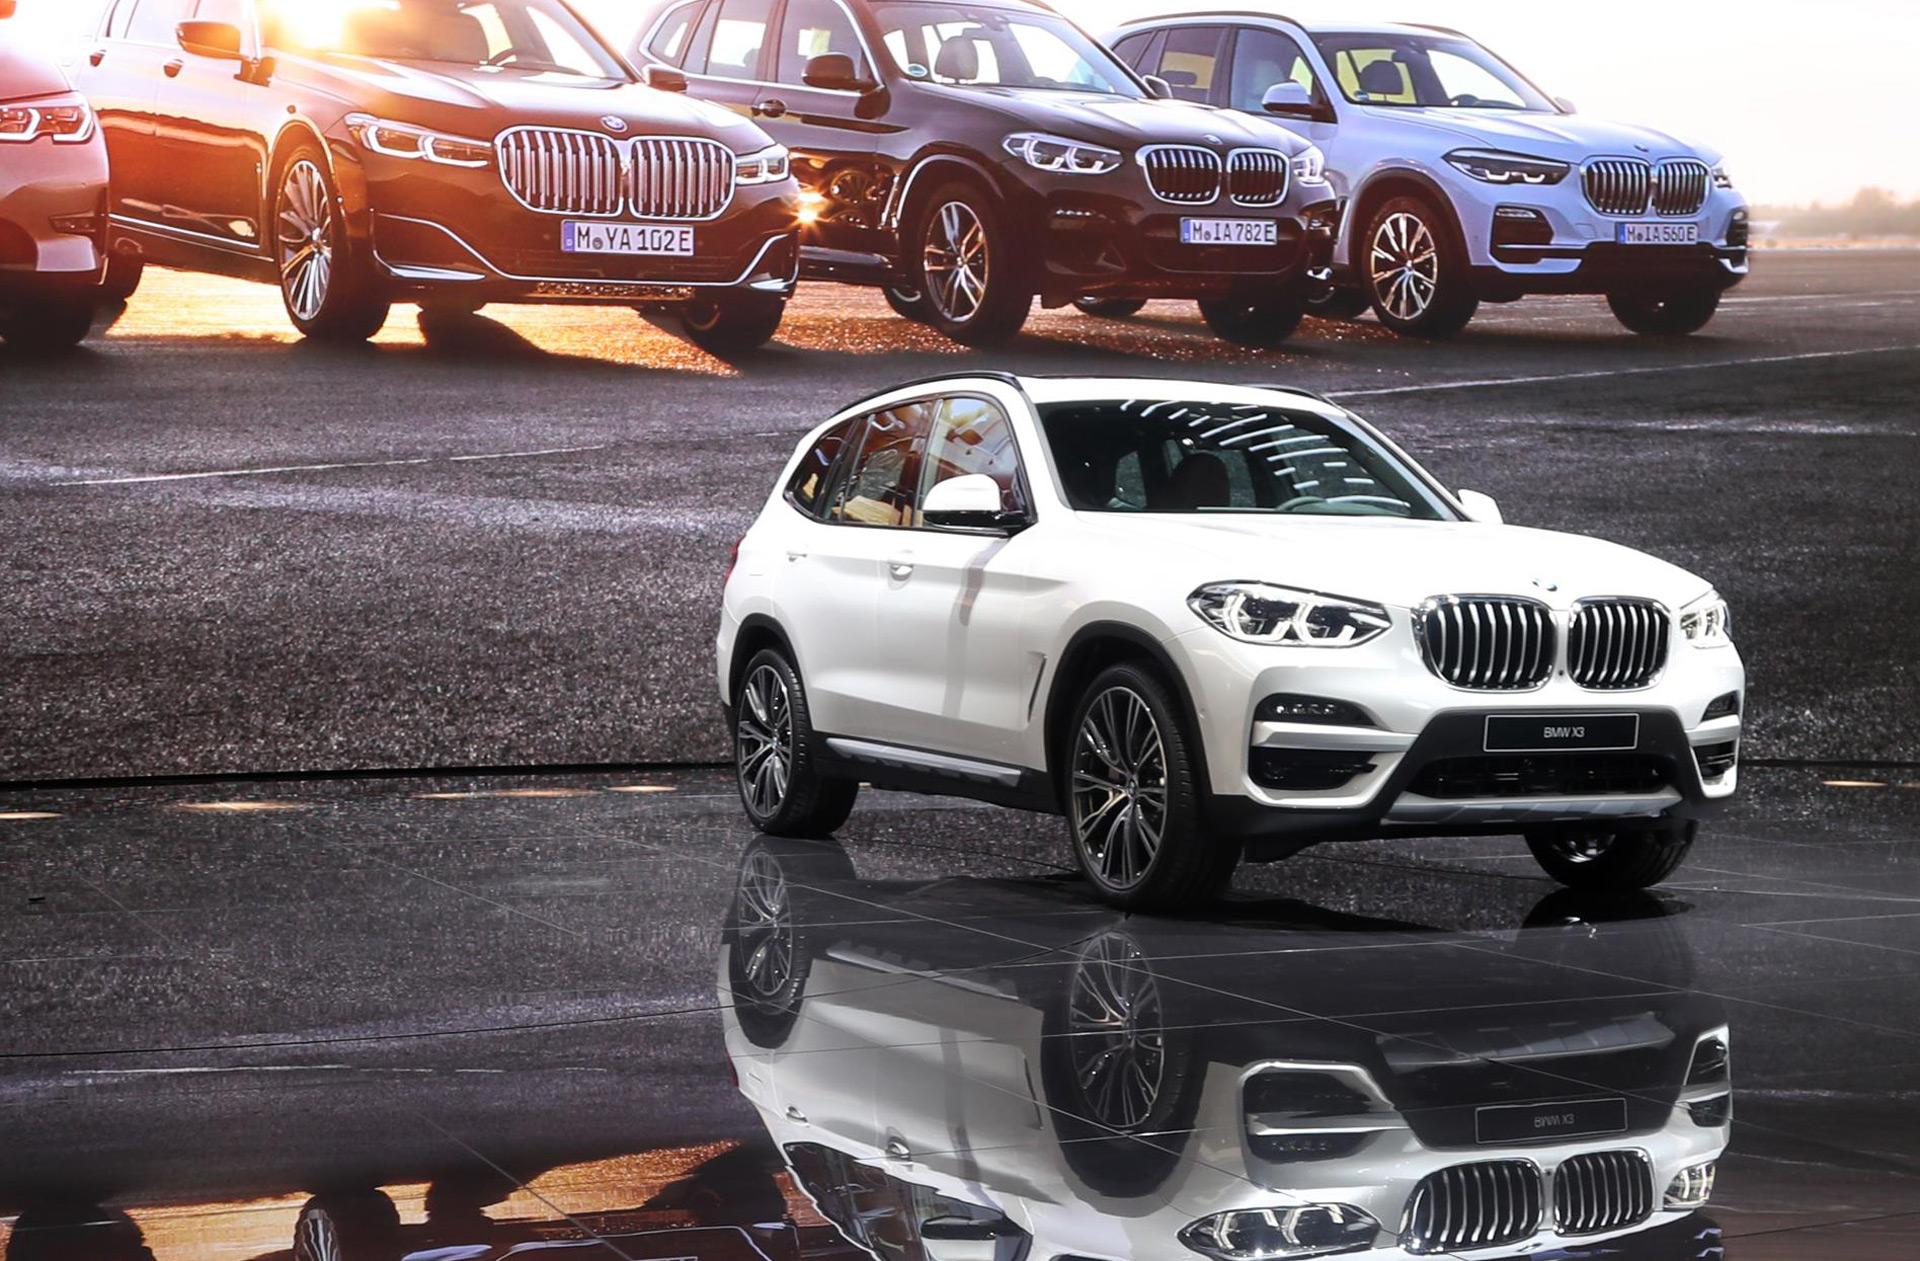 BMW X3 XDrive30e Plug In Hybrid Due In US In 2020